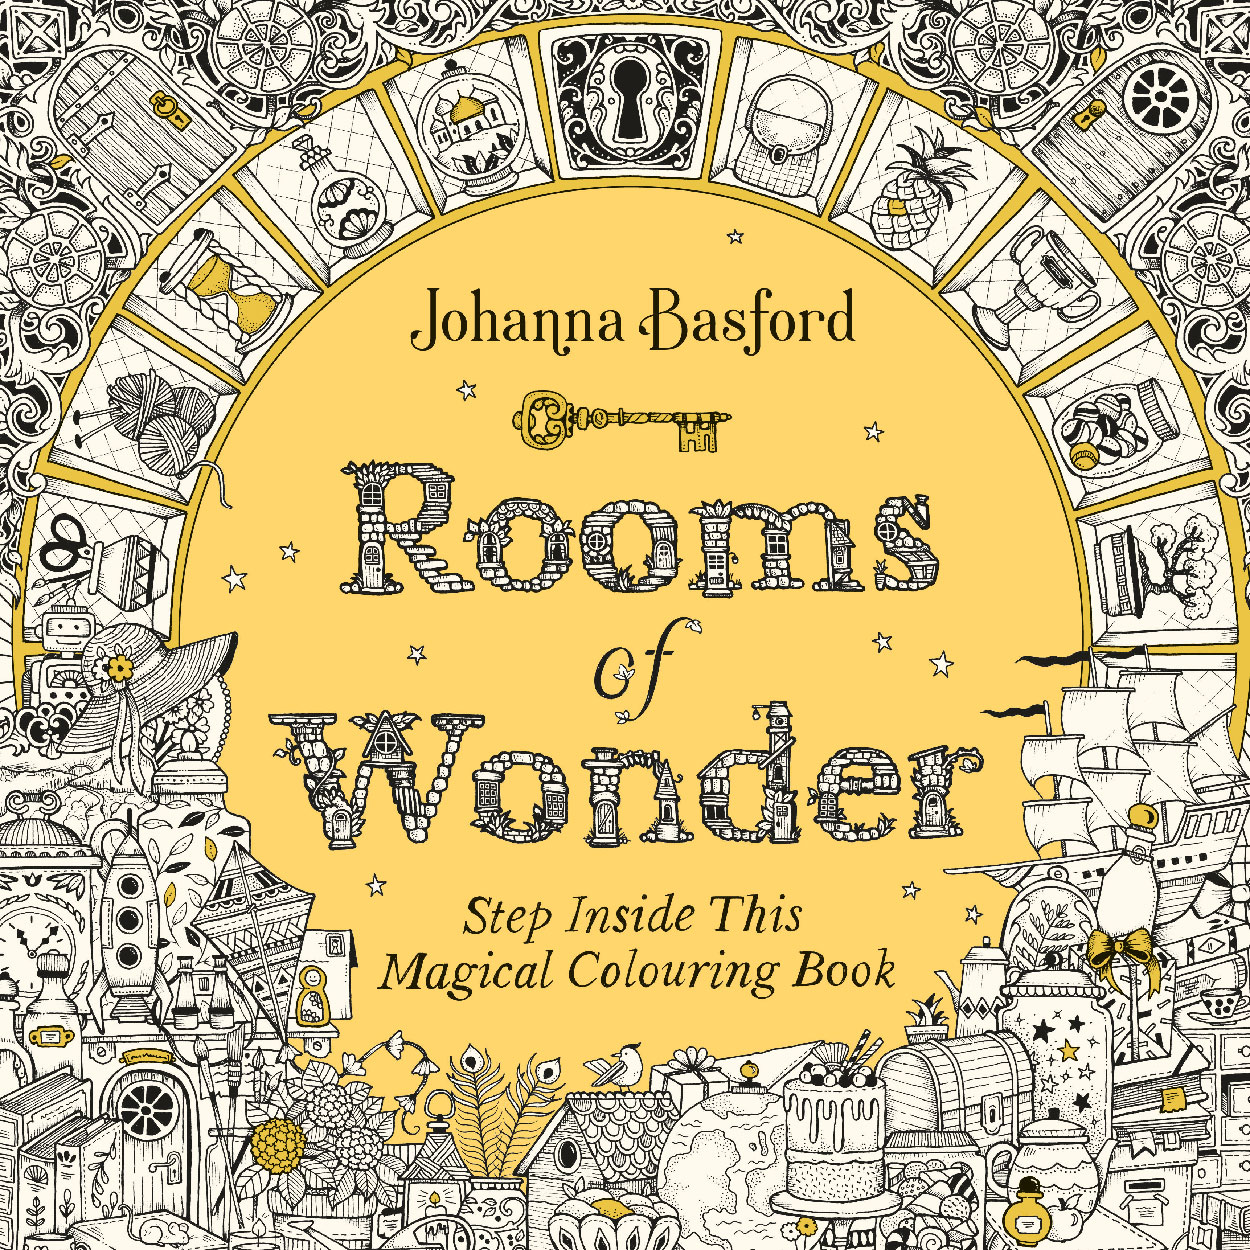 Rooms of Wonder: Step Inside this Magical Colouring Book - Johanna Basford